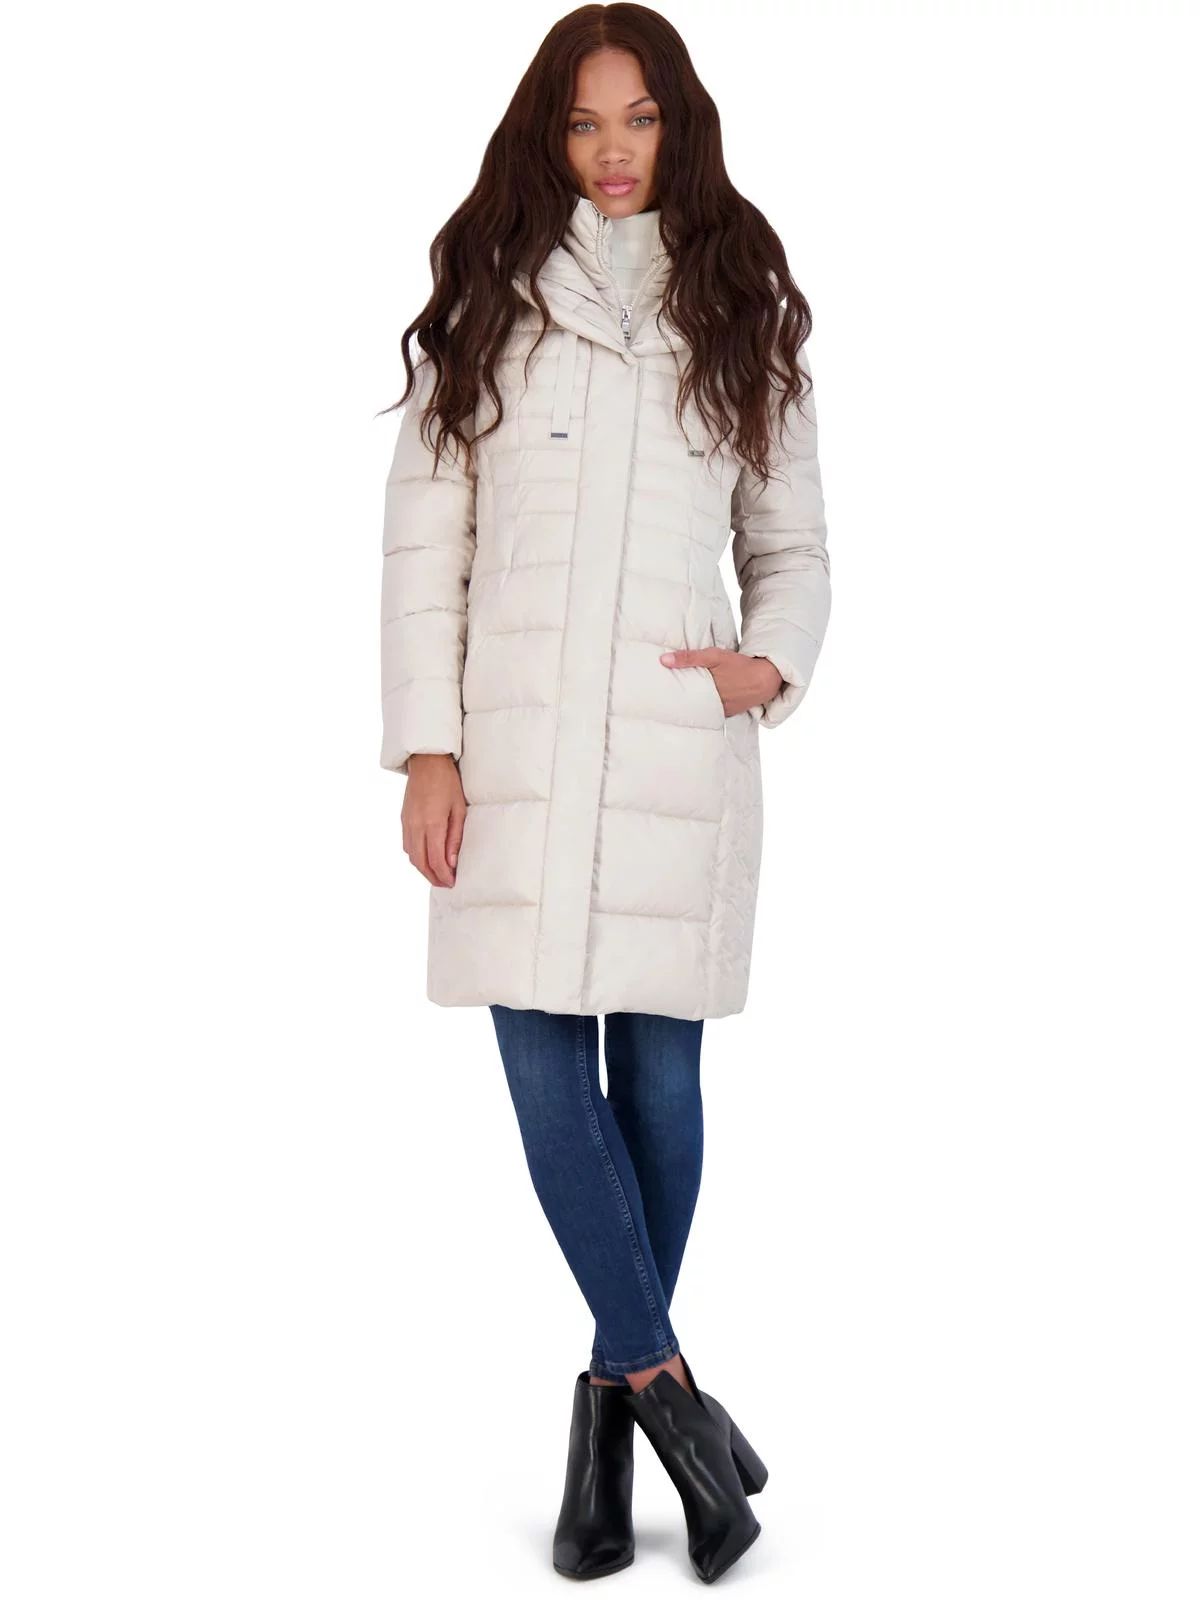 Tahari Casey Fitted Puffer Coat for Women-Quilted Winter Coat with Bib | Walmart (US)